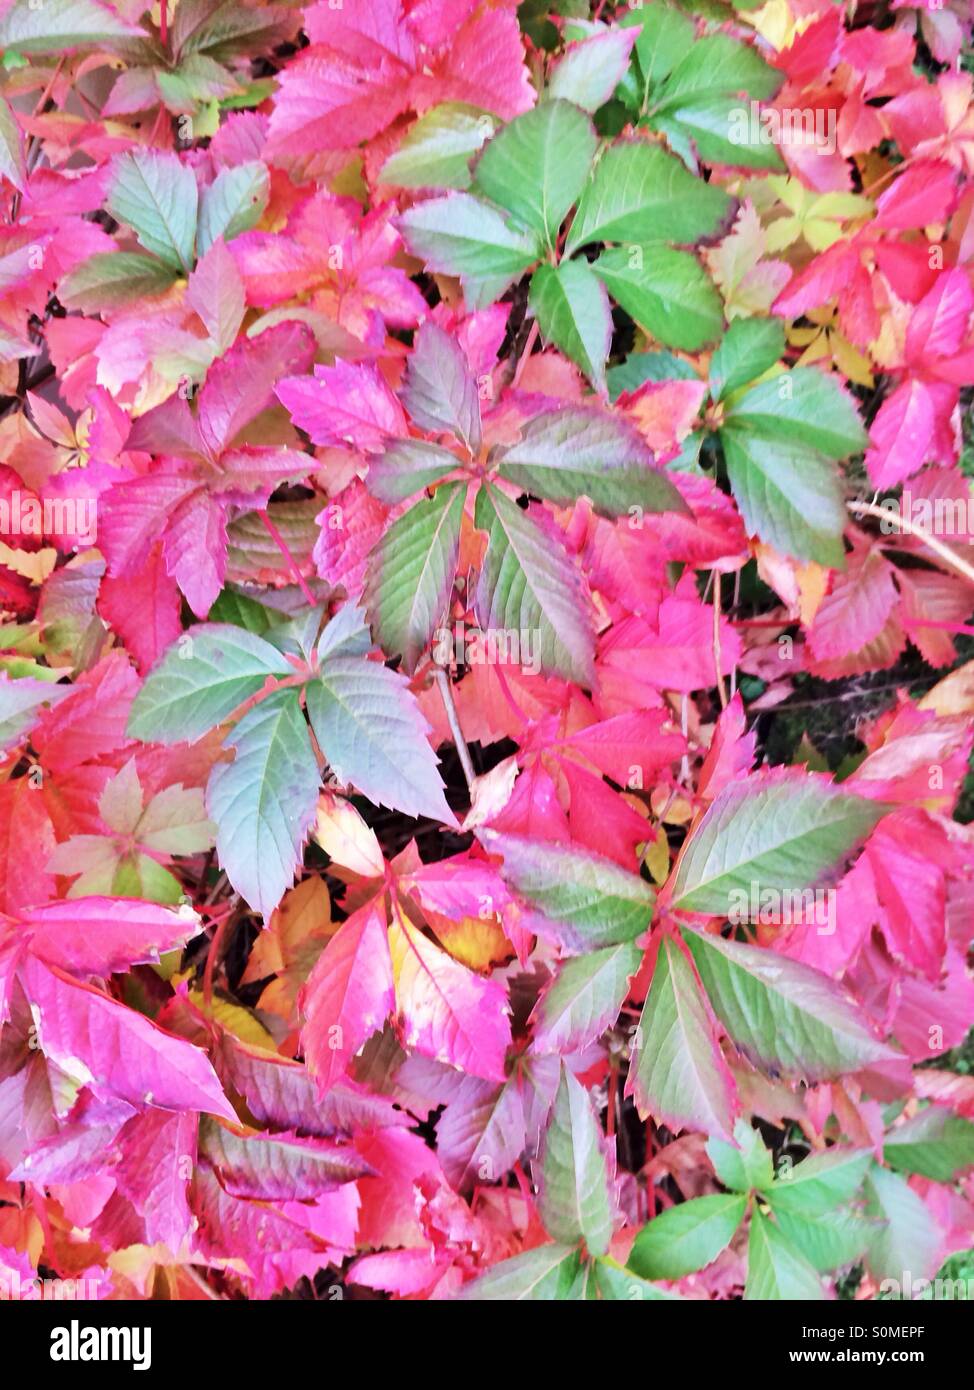 Green red autumn leaves Stock Photo